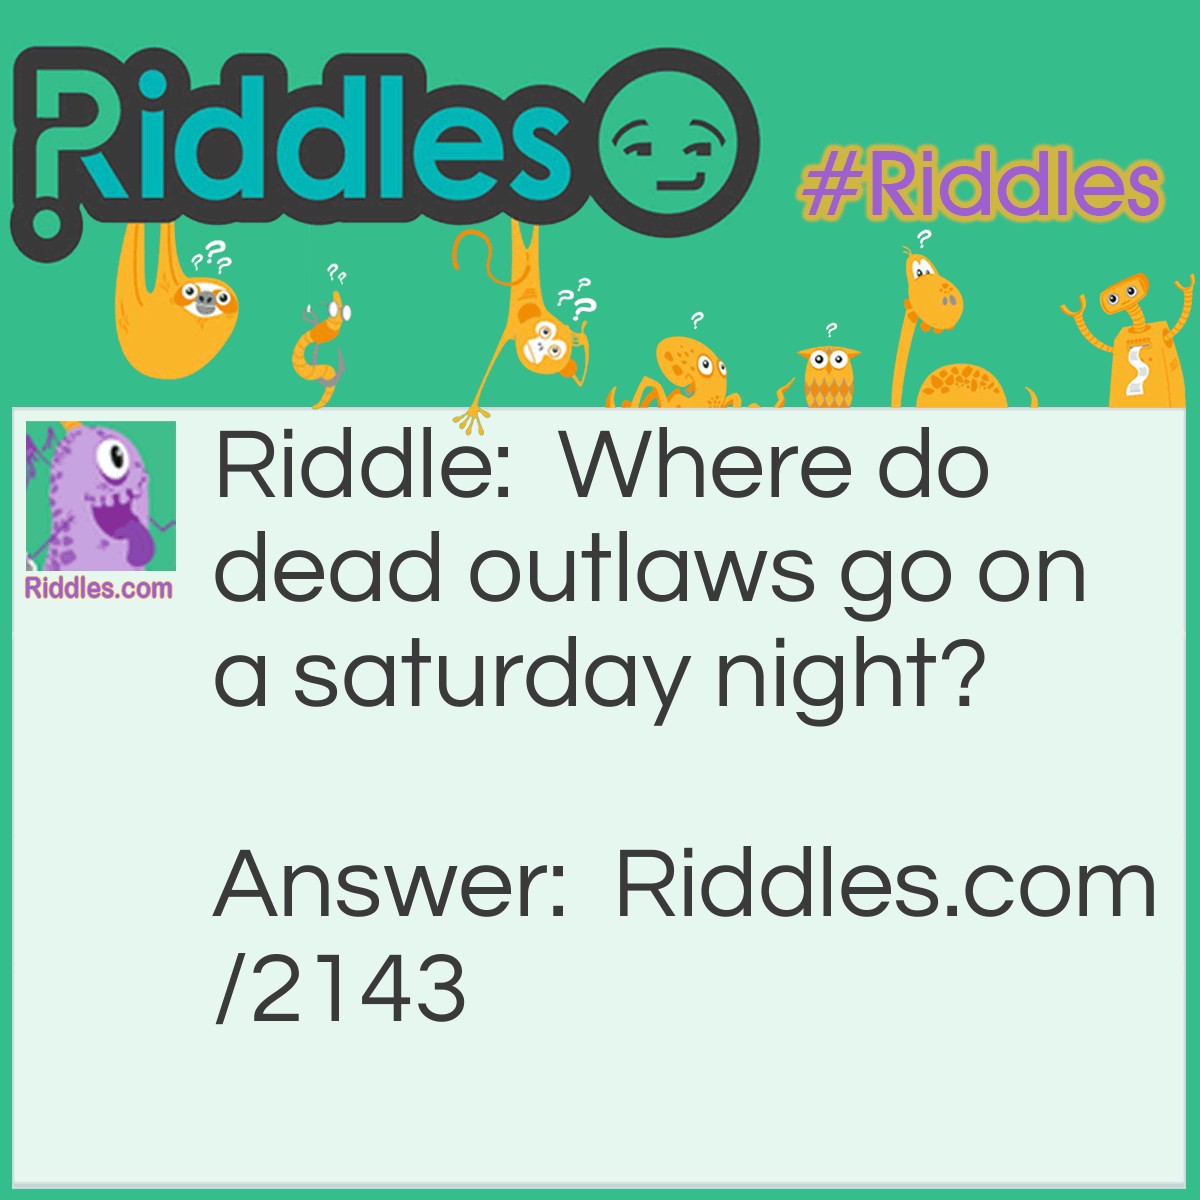 Riddle: Where do dead outlaws go on a saturday night? Answer: To ghost towns.